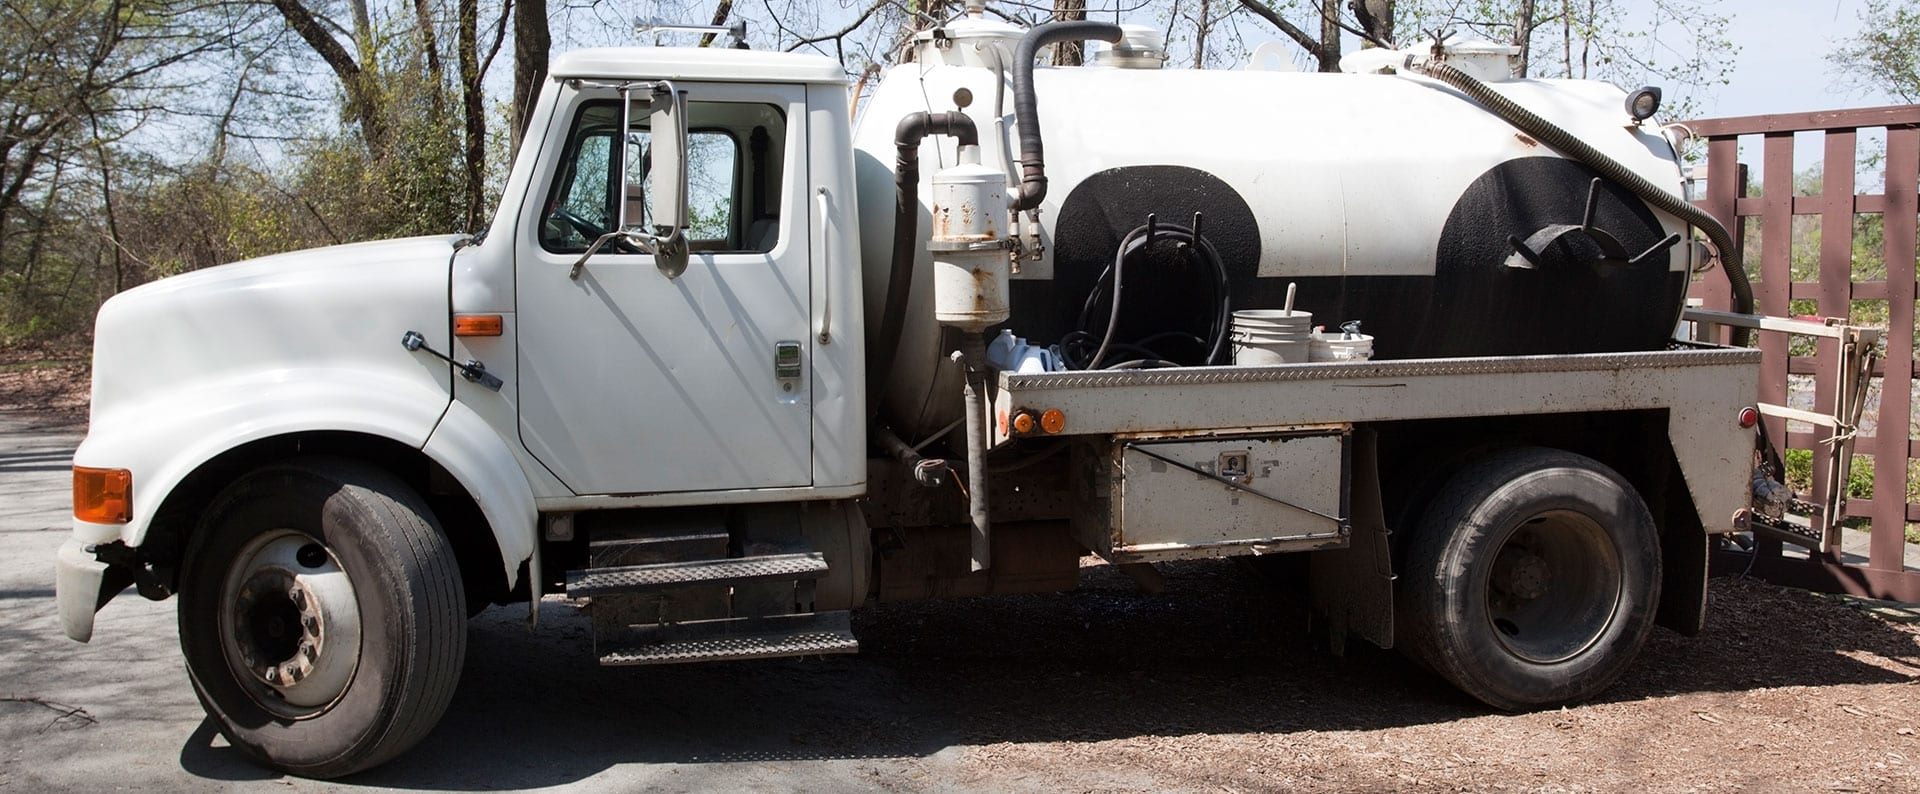 Specialized truck for septic work